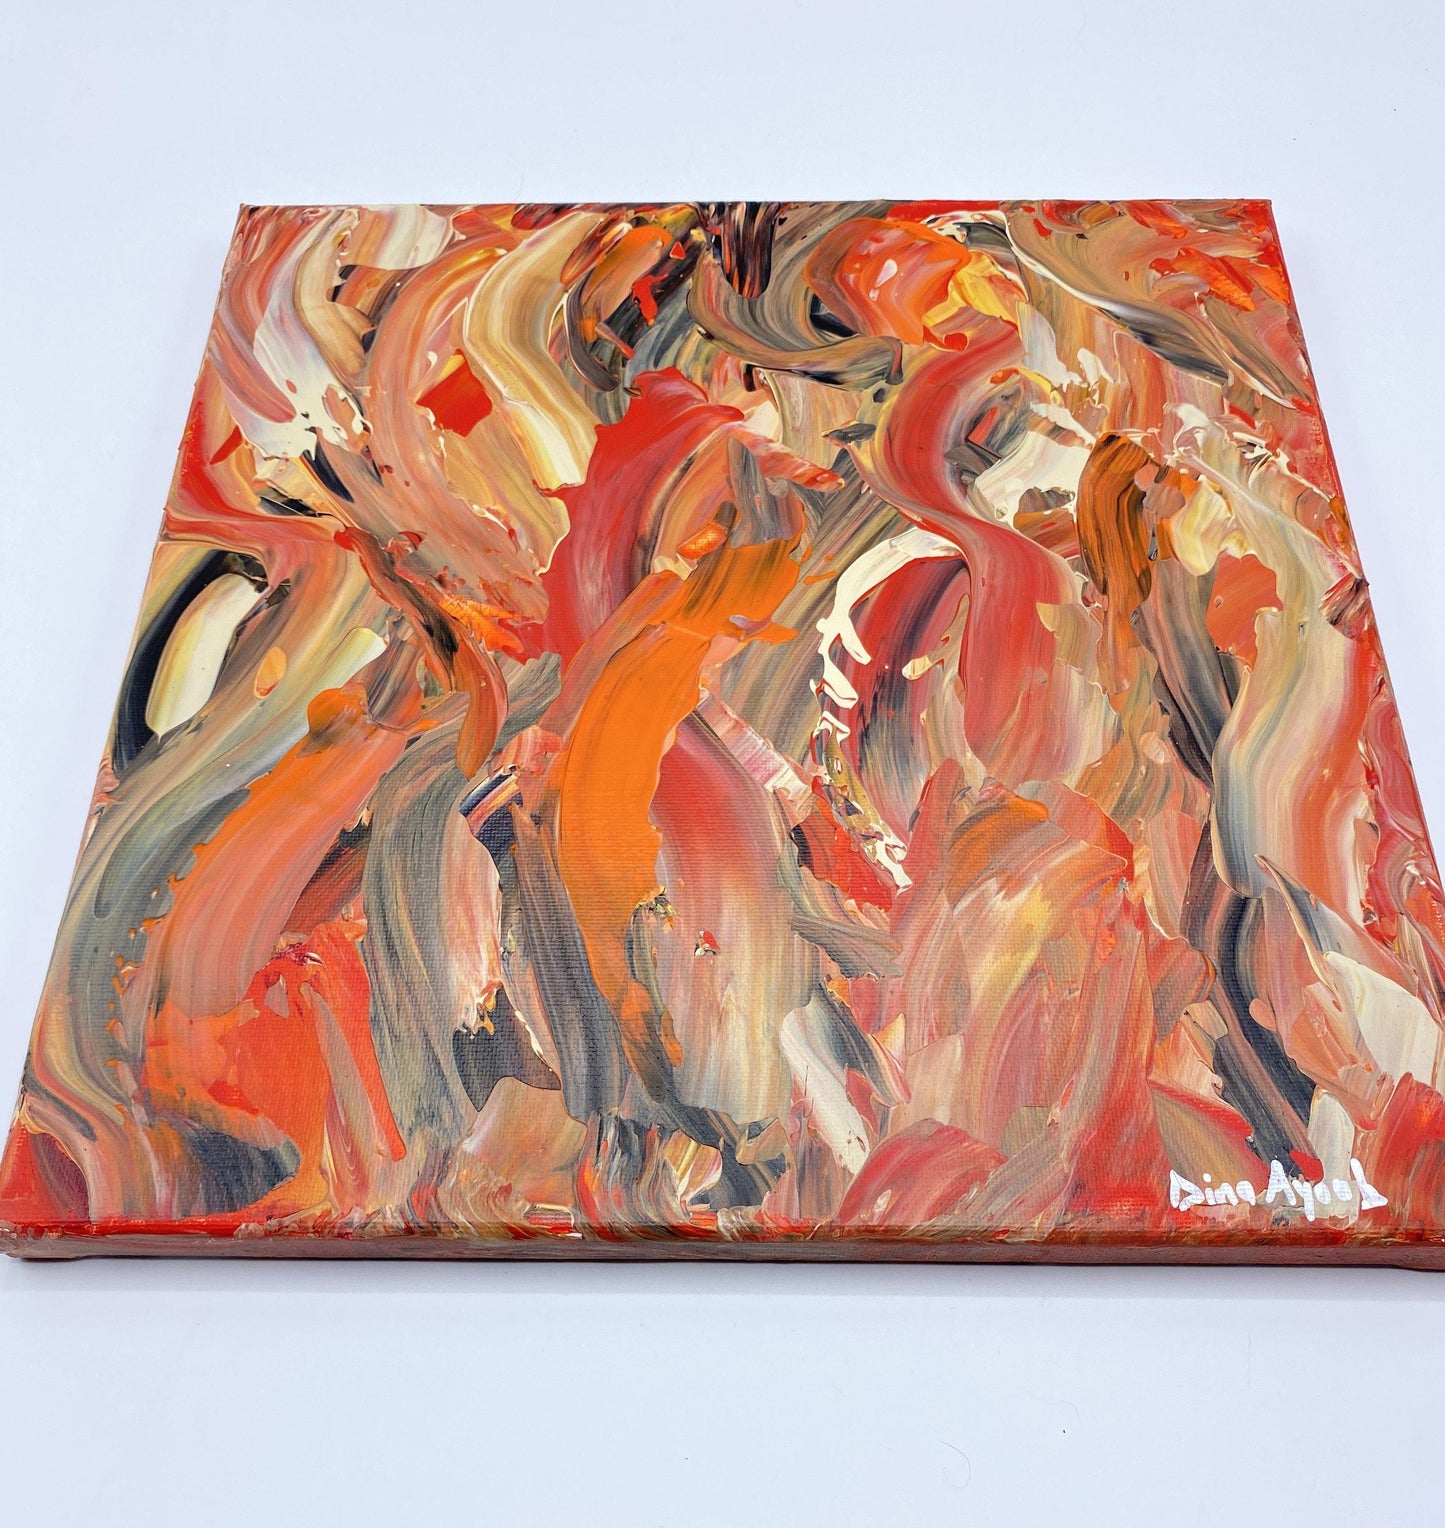 Abstract original acrylic painting in orange and red